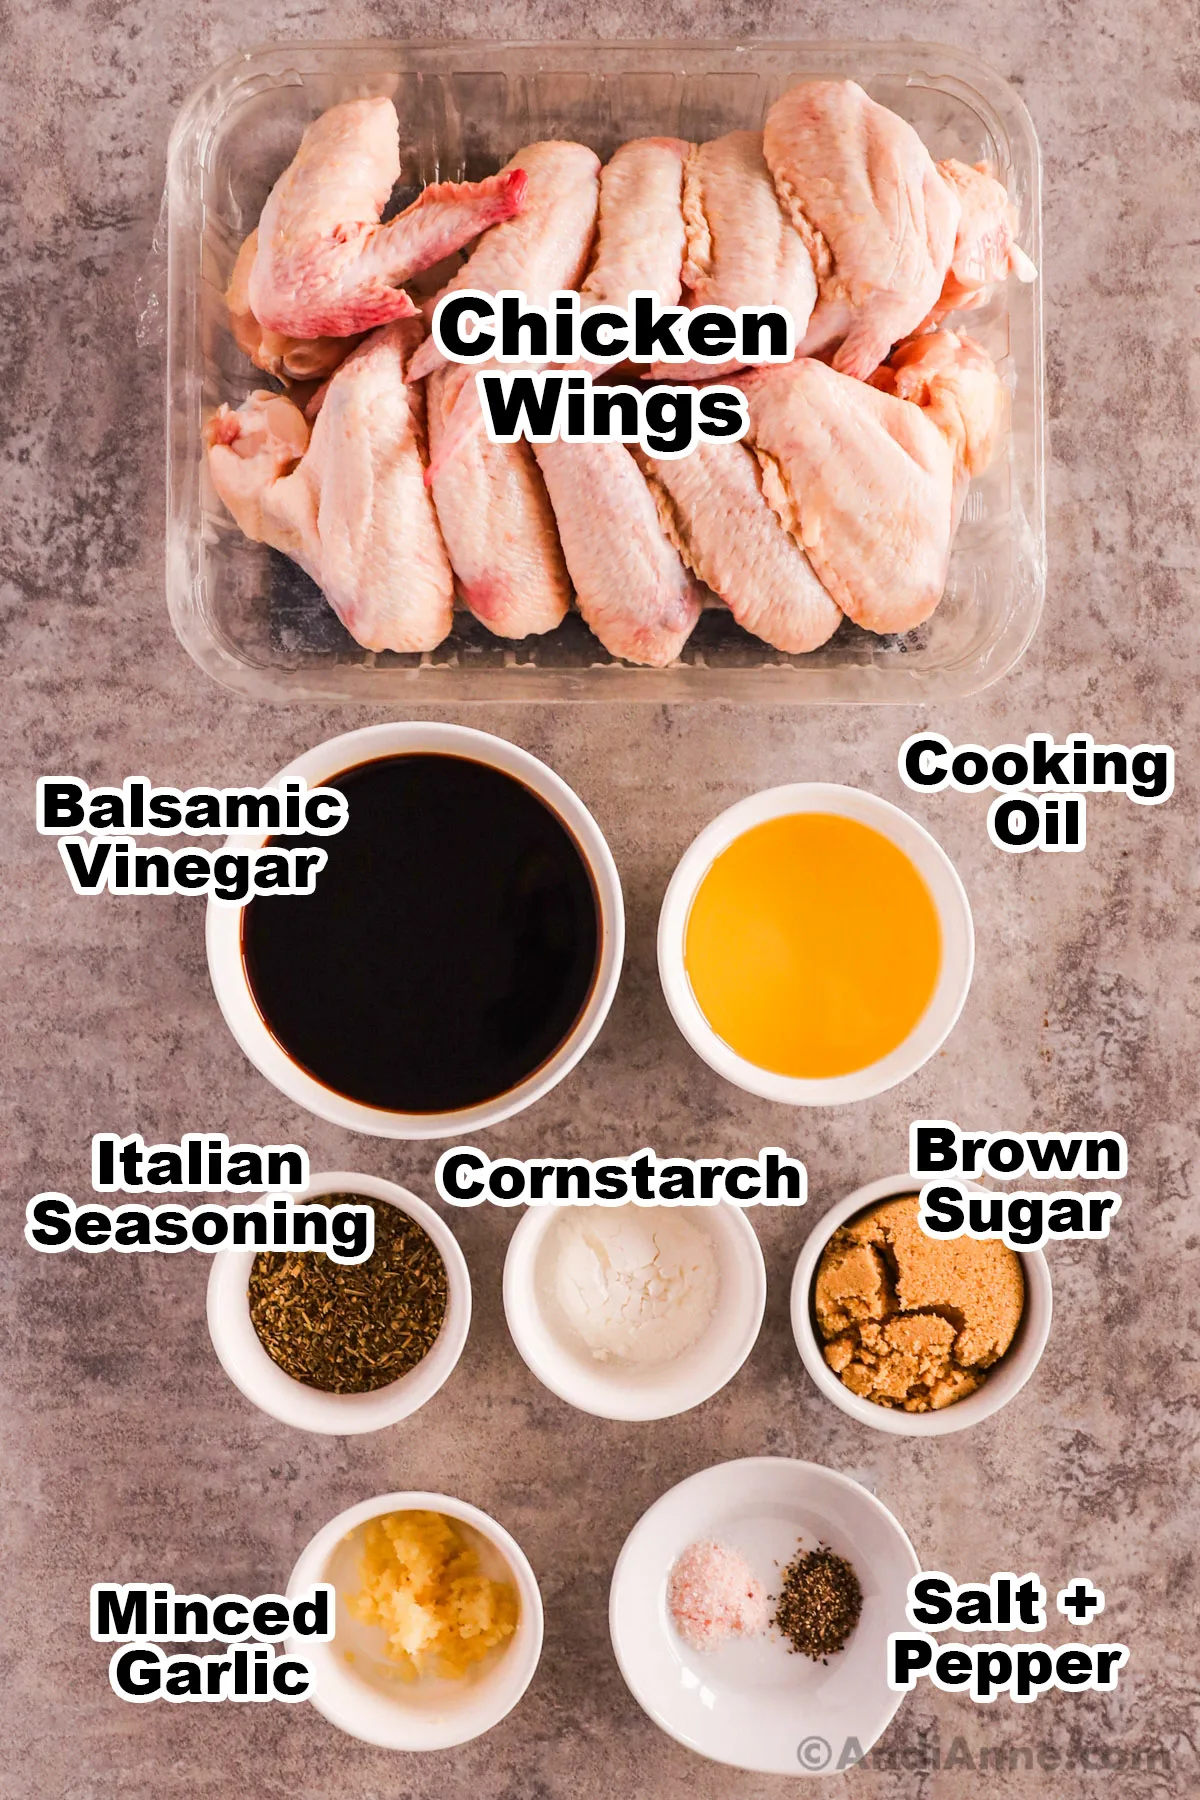 Recipe ingredients including raw chicken wings, bowls of balsamic vinegar, cooking oil, cornstarch, brown sugar, minced garlic and spices.